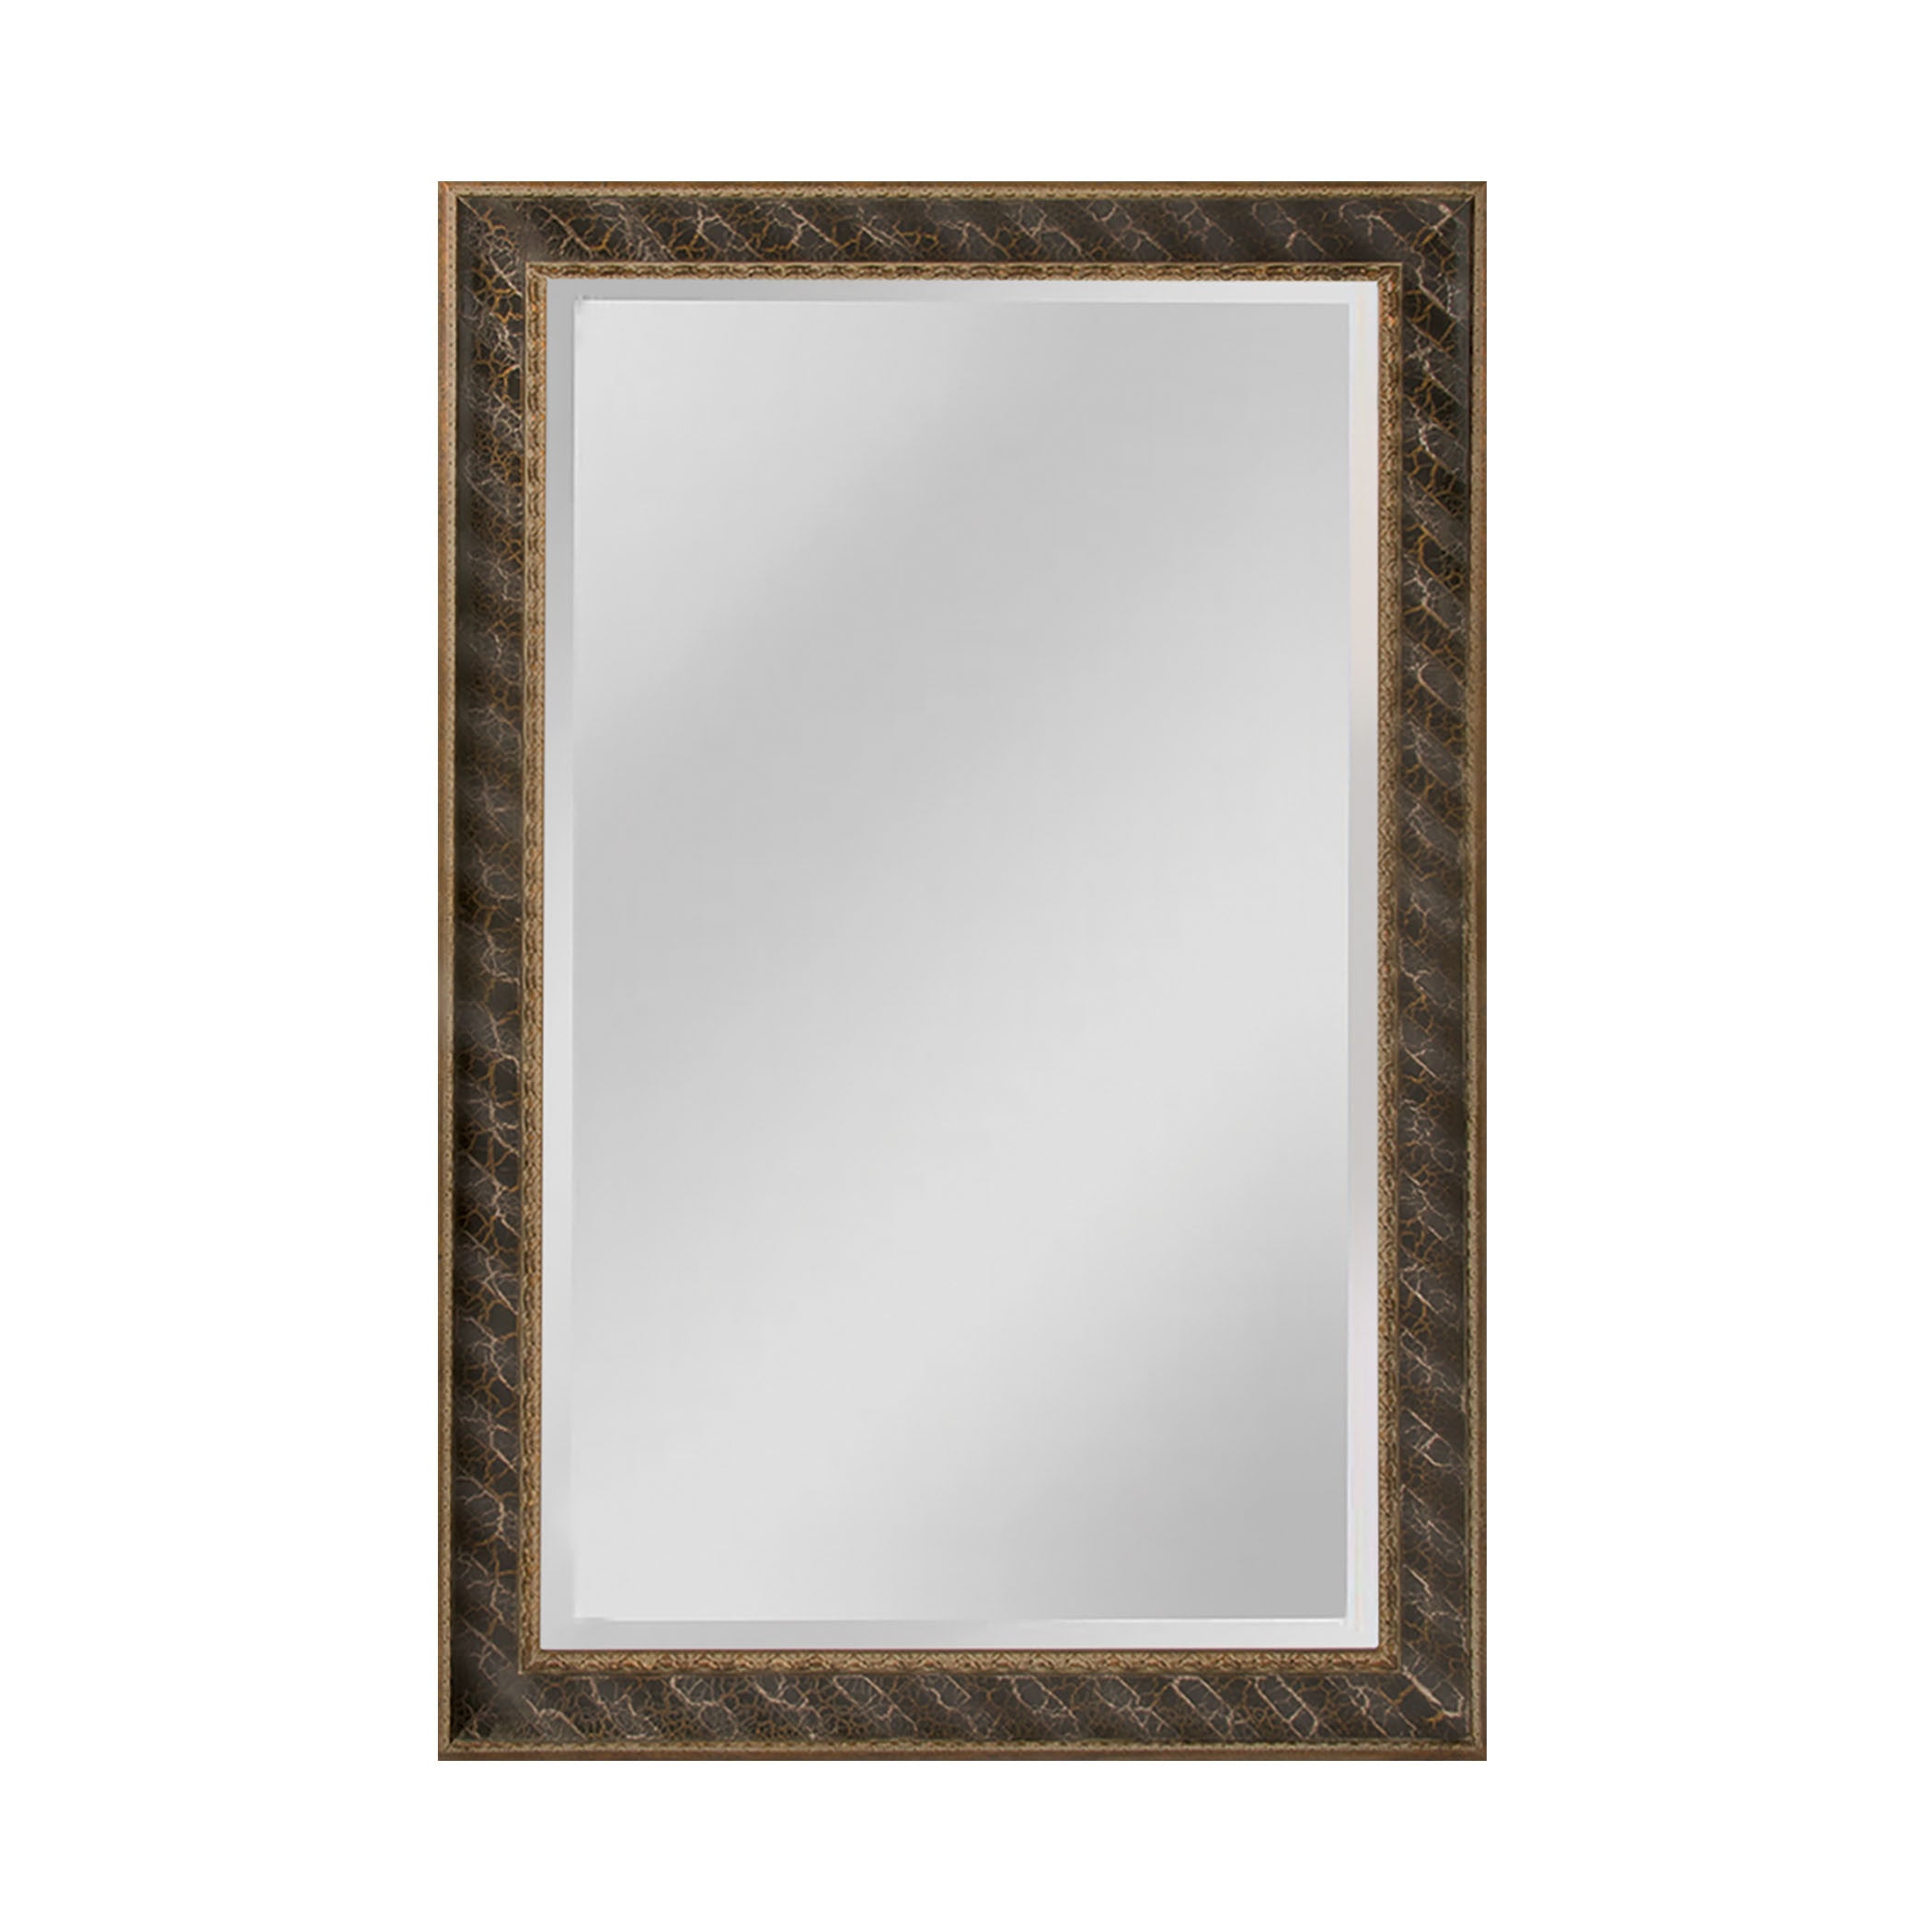 Mirror Masters Mw4024b-0052 Clearfield Collection Light Antique Silver,gold,black Finish Wall Mirror